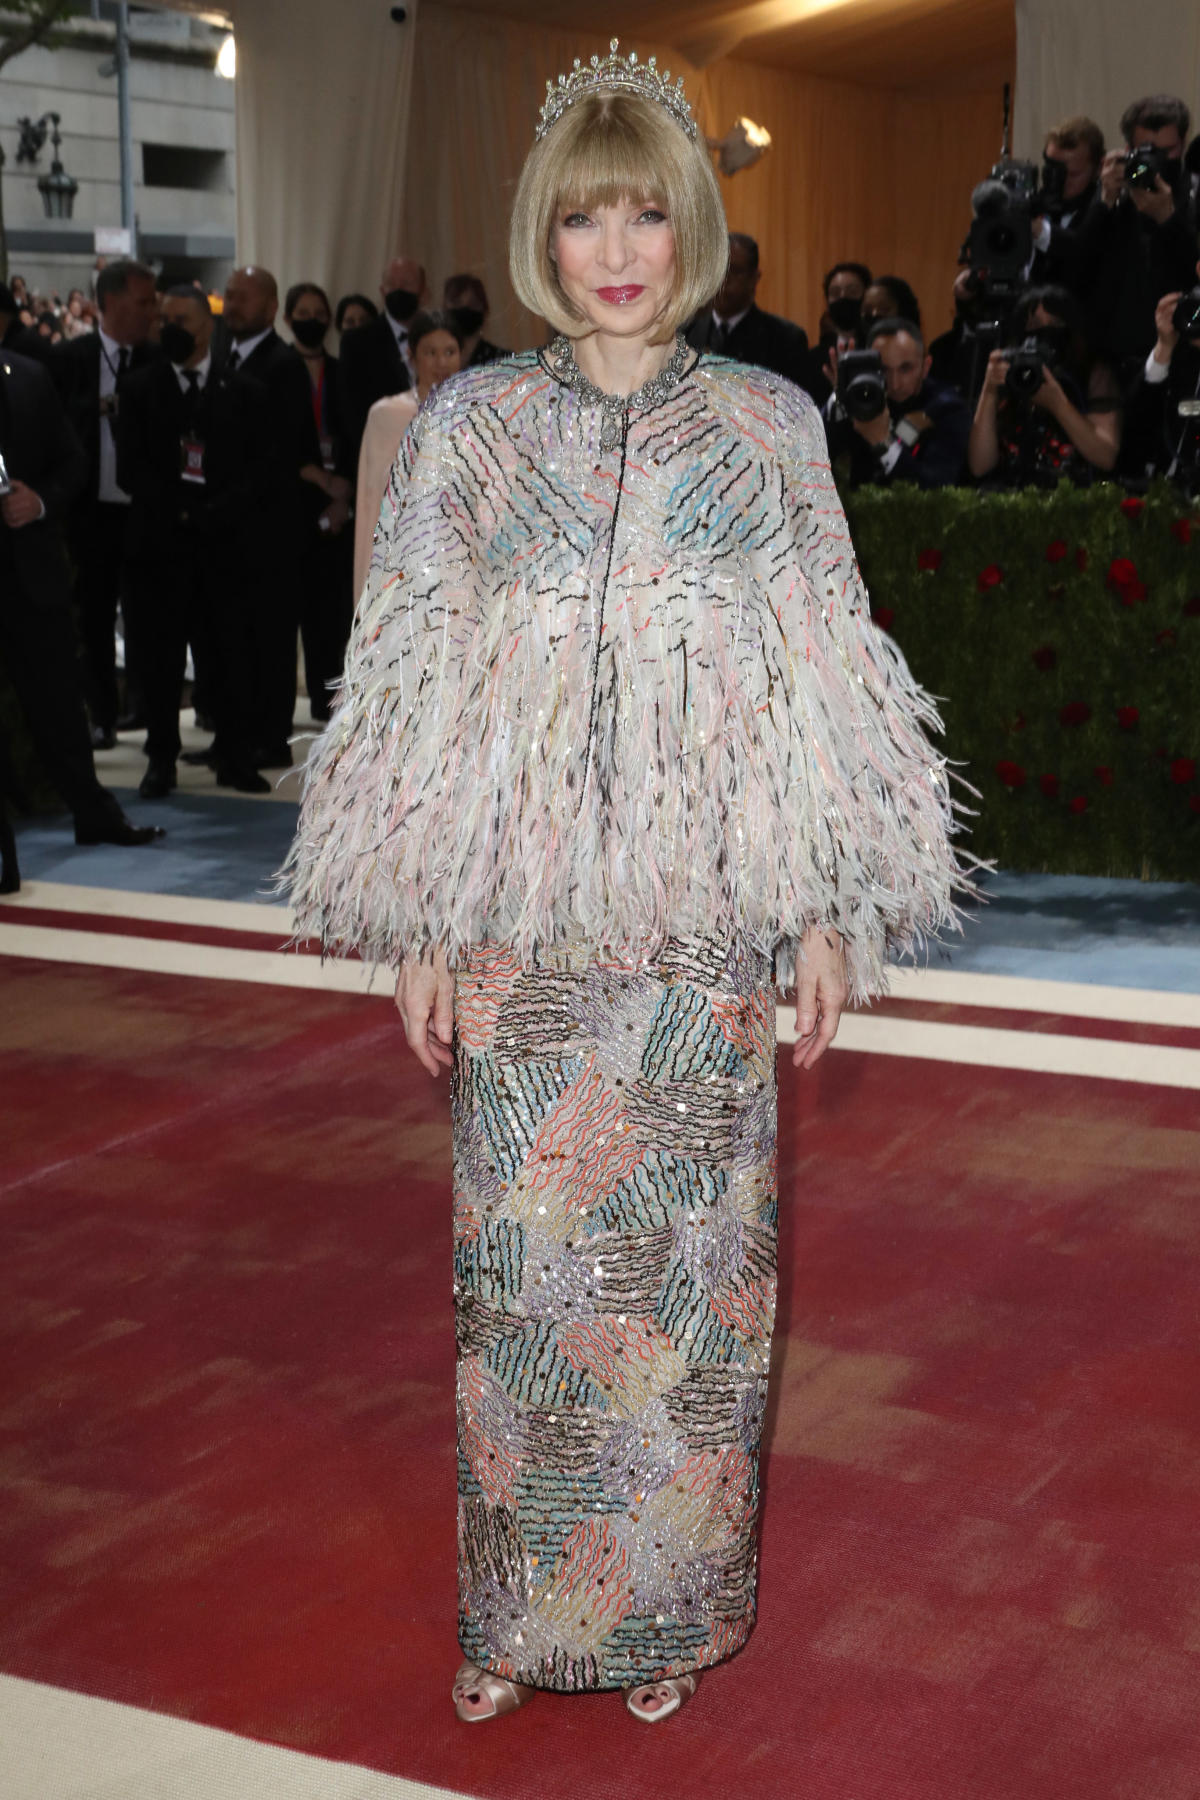 Who Is Banned From the Met Gala? Find Out Which Stars Won’t Be Invited